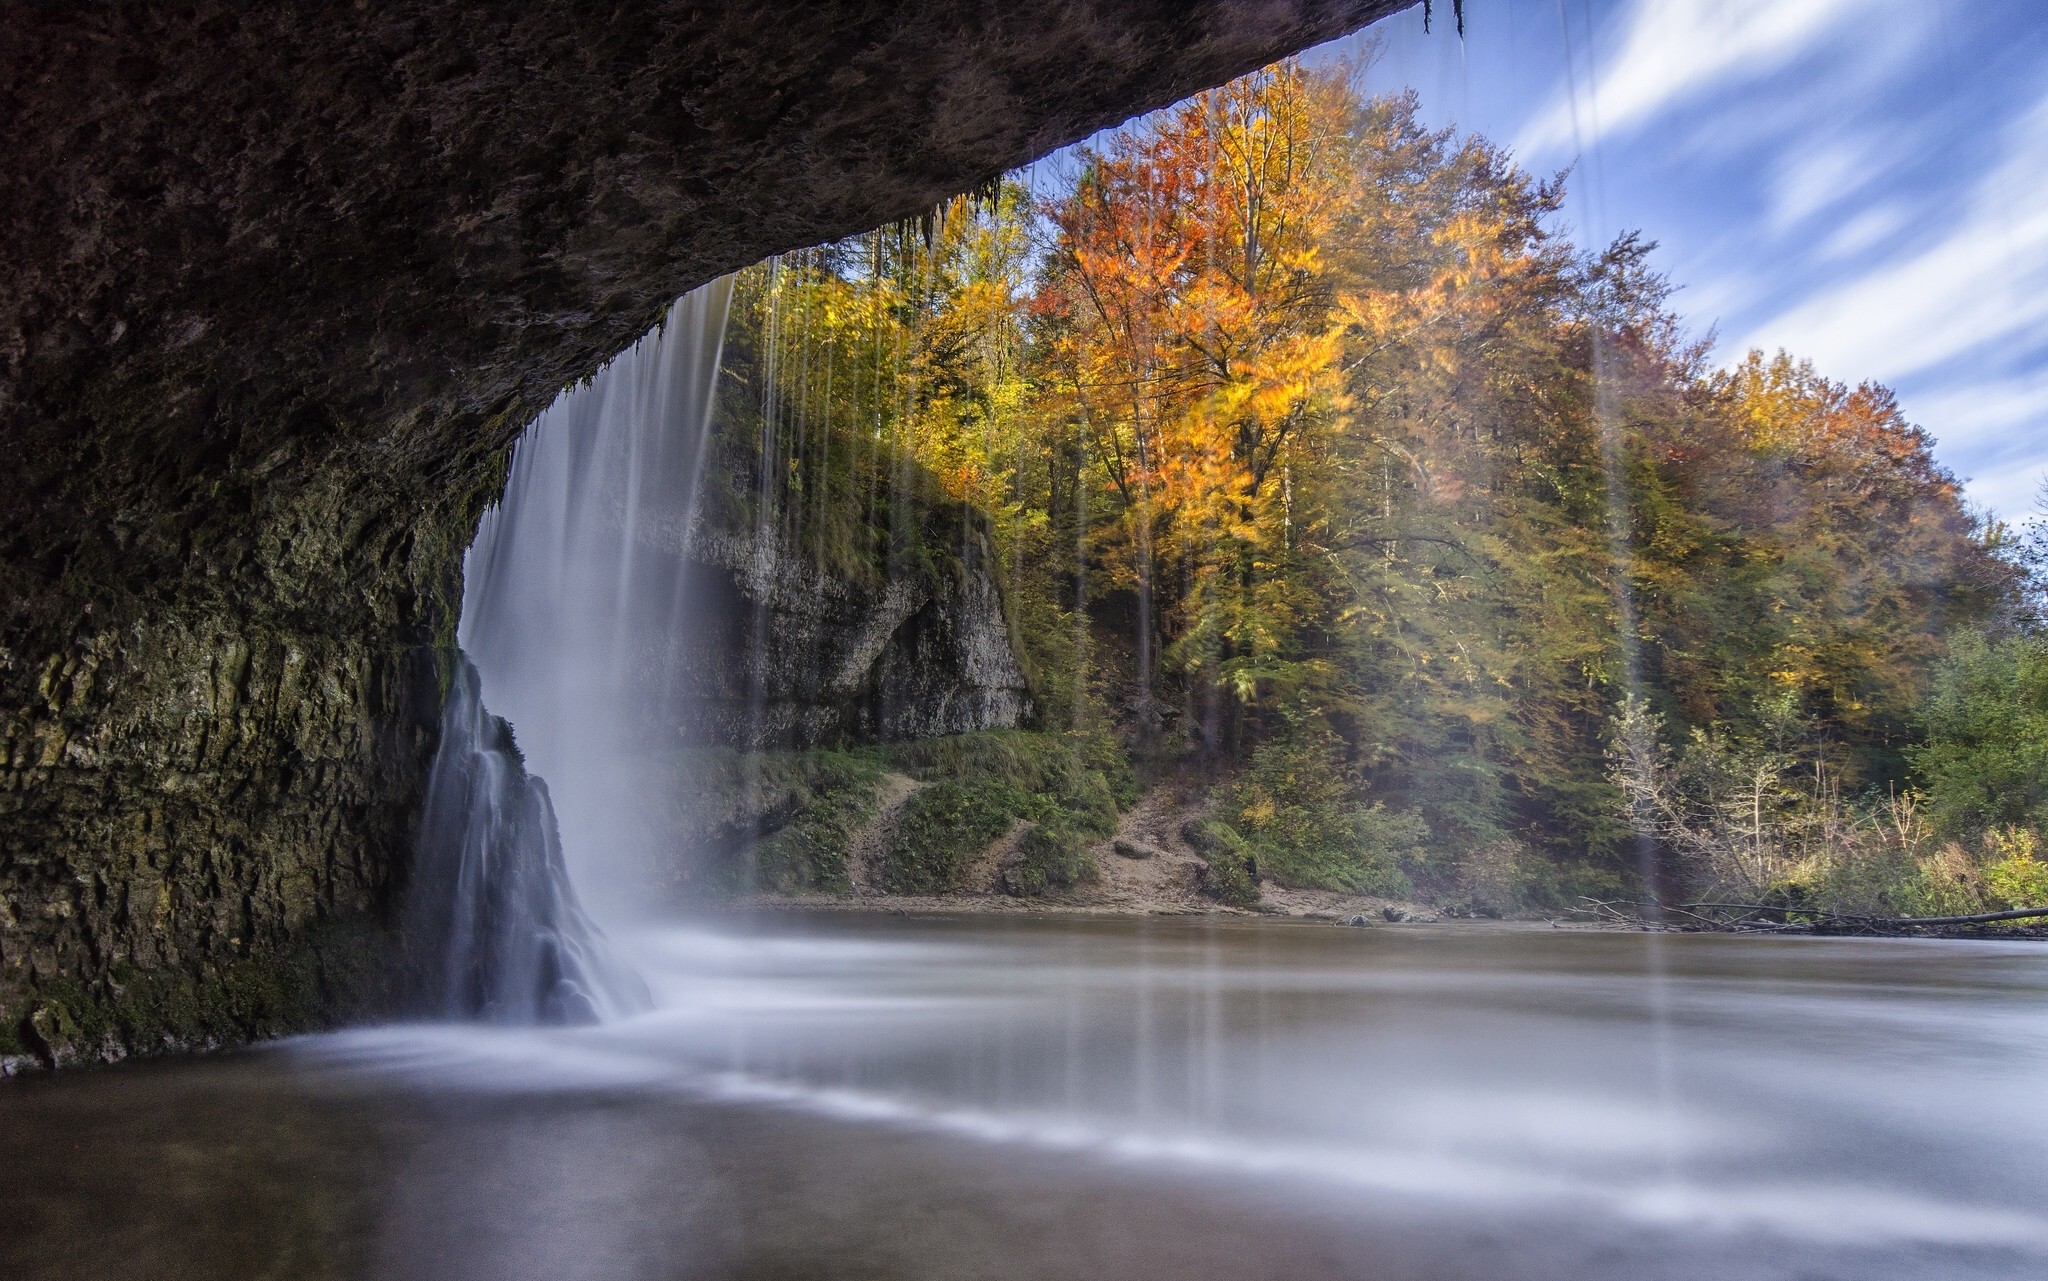 General 2048x1281 nature landscape water waterfall long exposure trees cave clouds